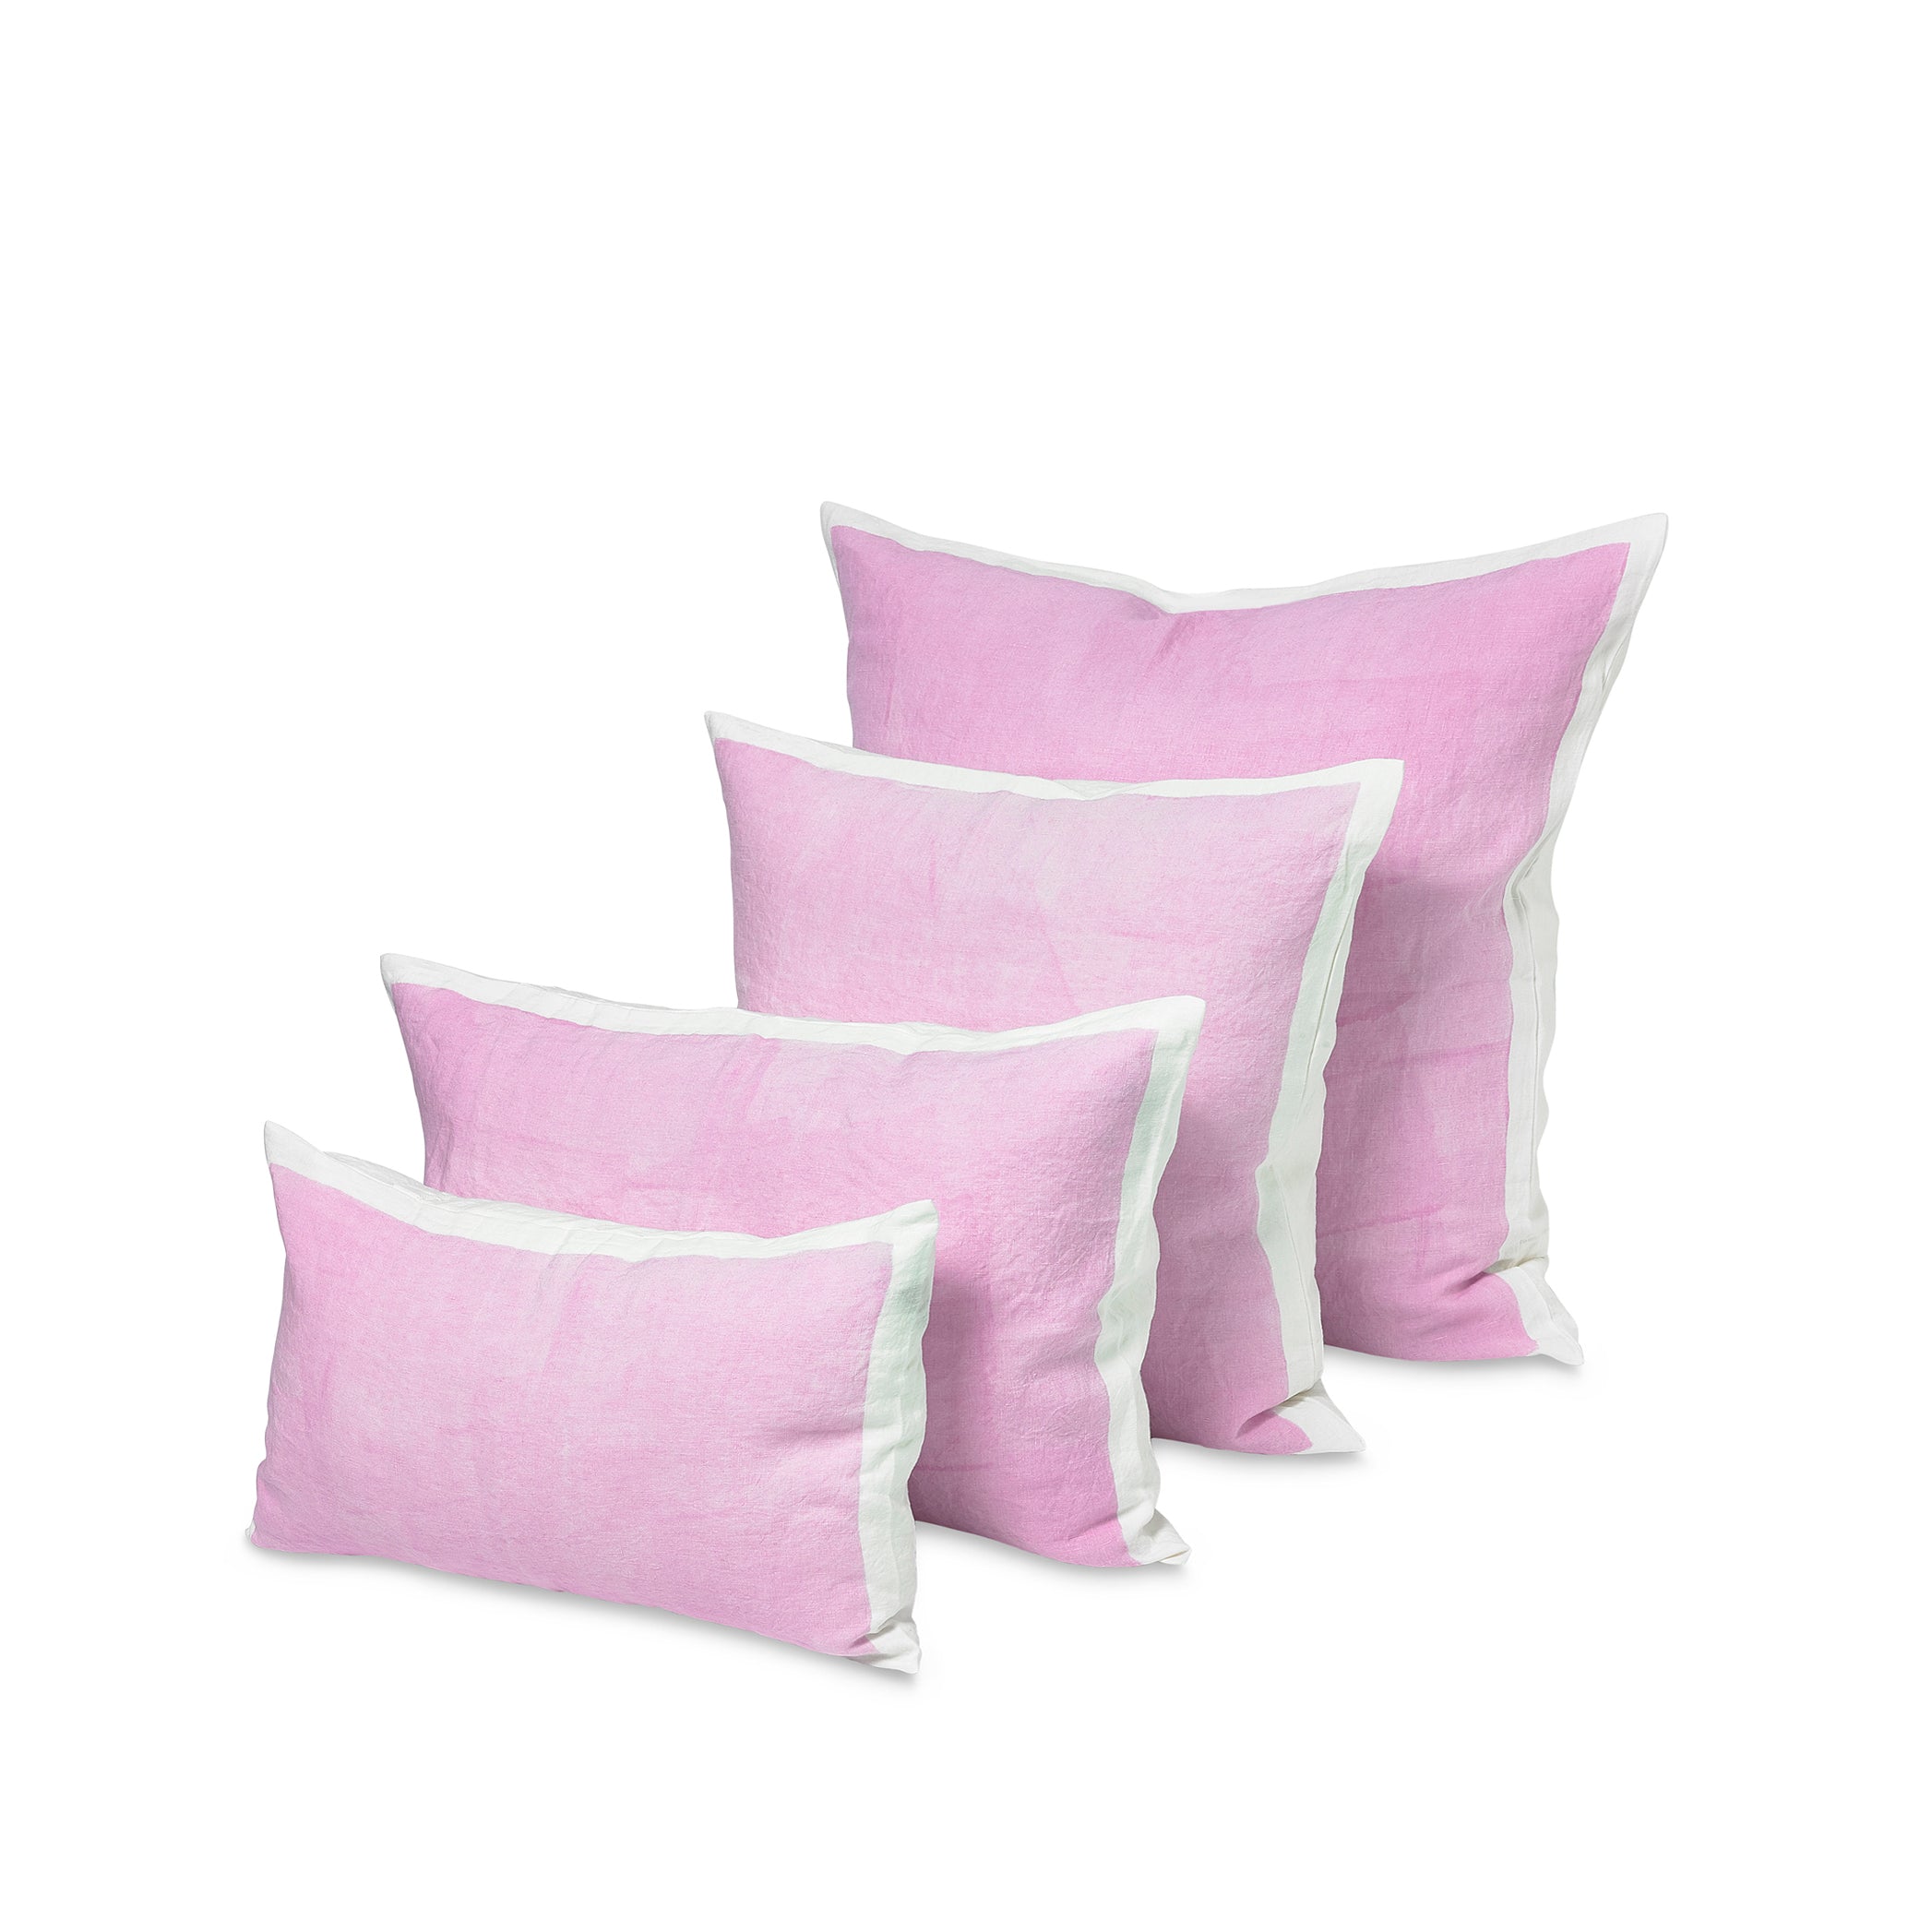 Hand Painted Linen Cushion in Pale Pink, 60cm x 40cm